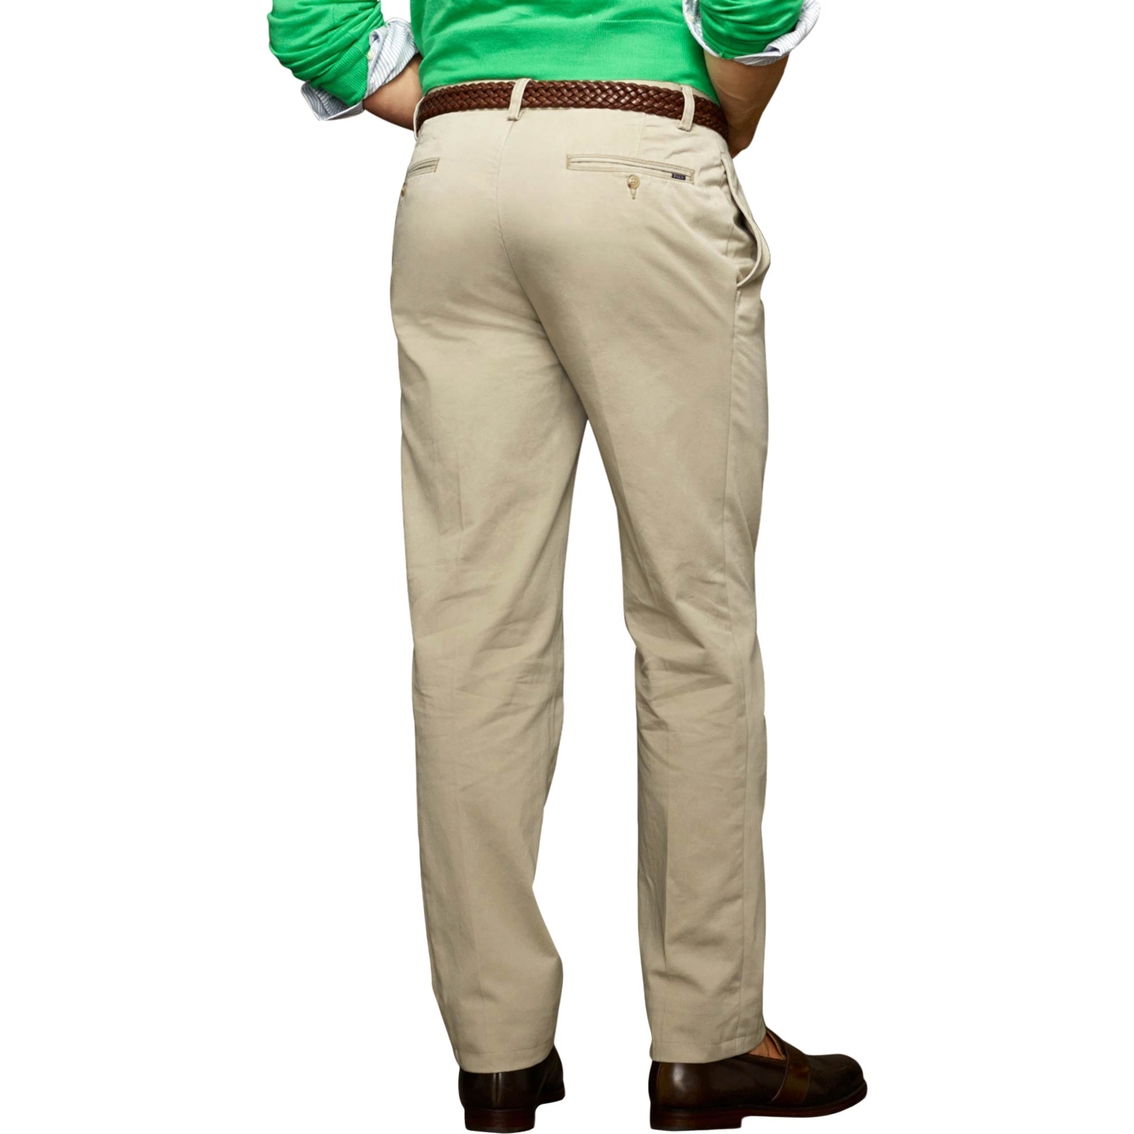 Polo Ralph Lauren Big & Tall Classic Fit Pleated Chino Pants - Image 2 of 2